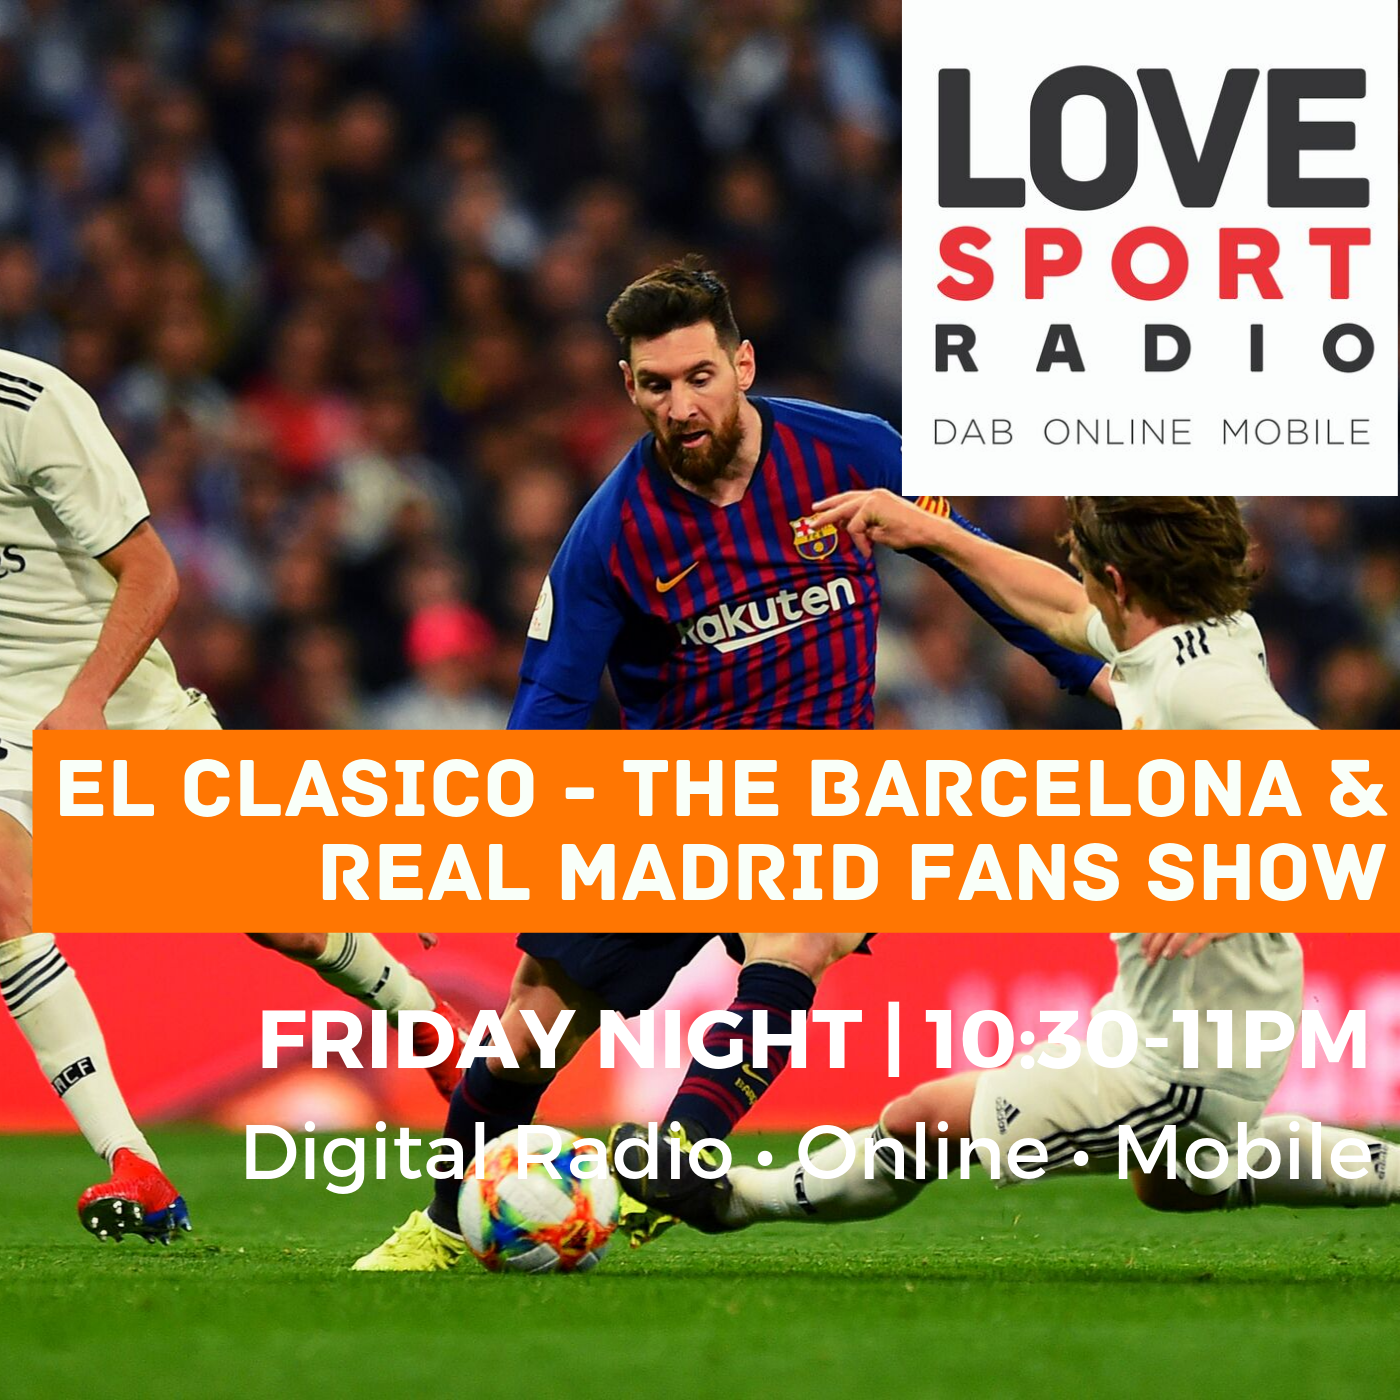 El Clasico - The Barcelona & Real Madrid Fans Show on Love Sport